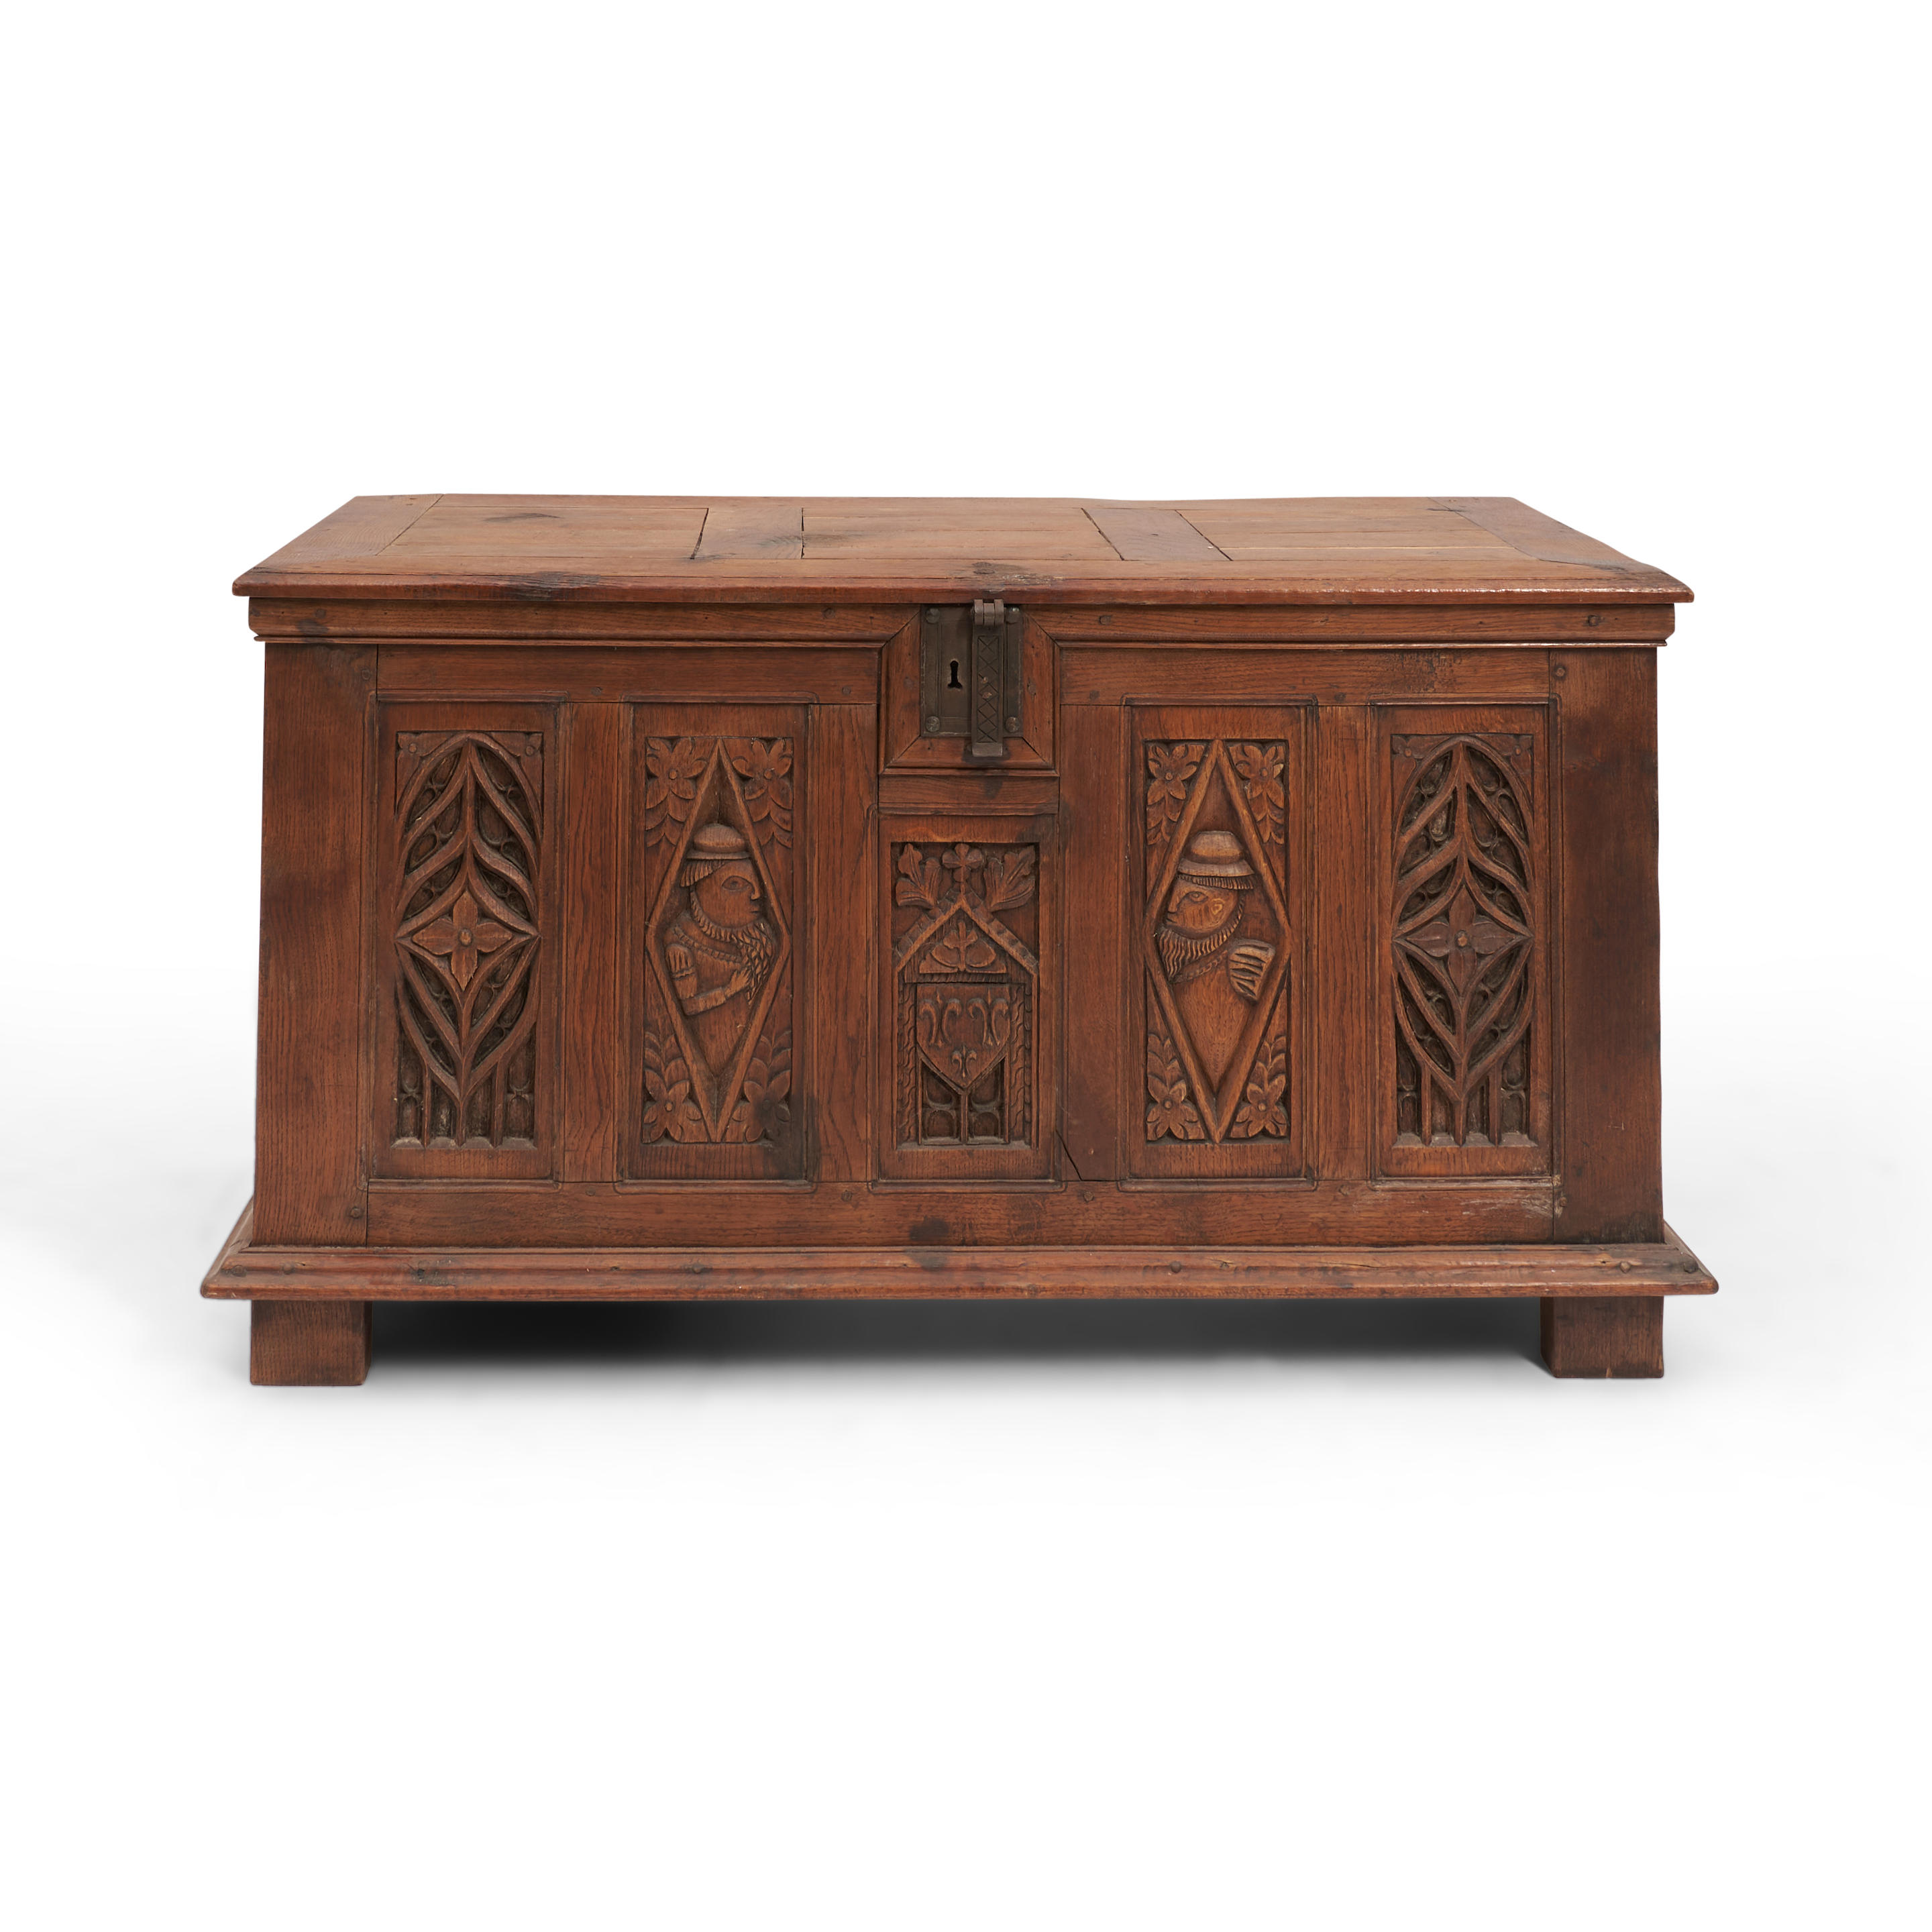 GOTHIC STYLE OAK CARVED CHEST CONVERTED 3ae80a